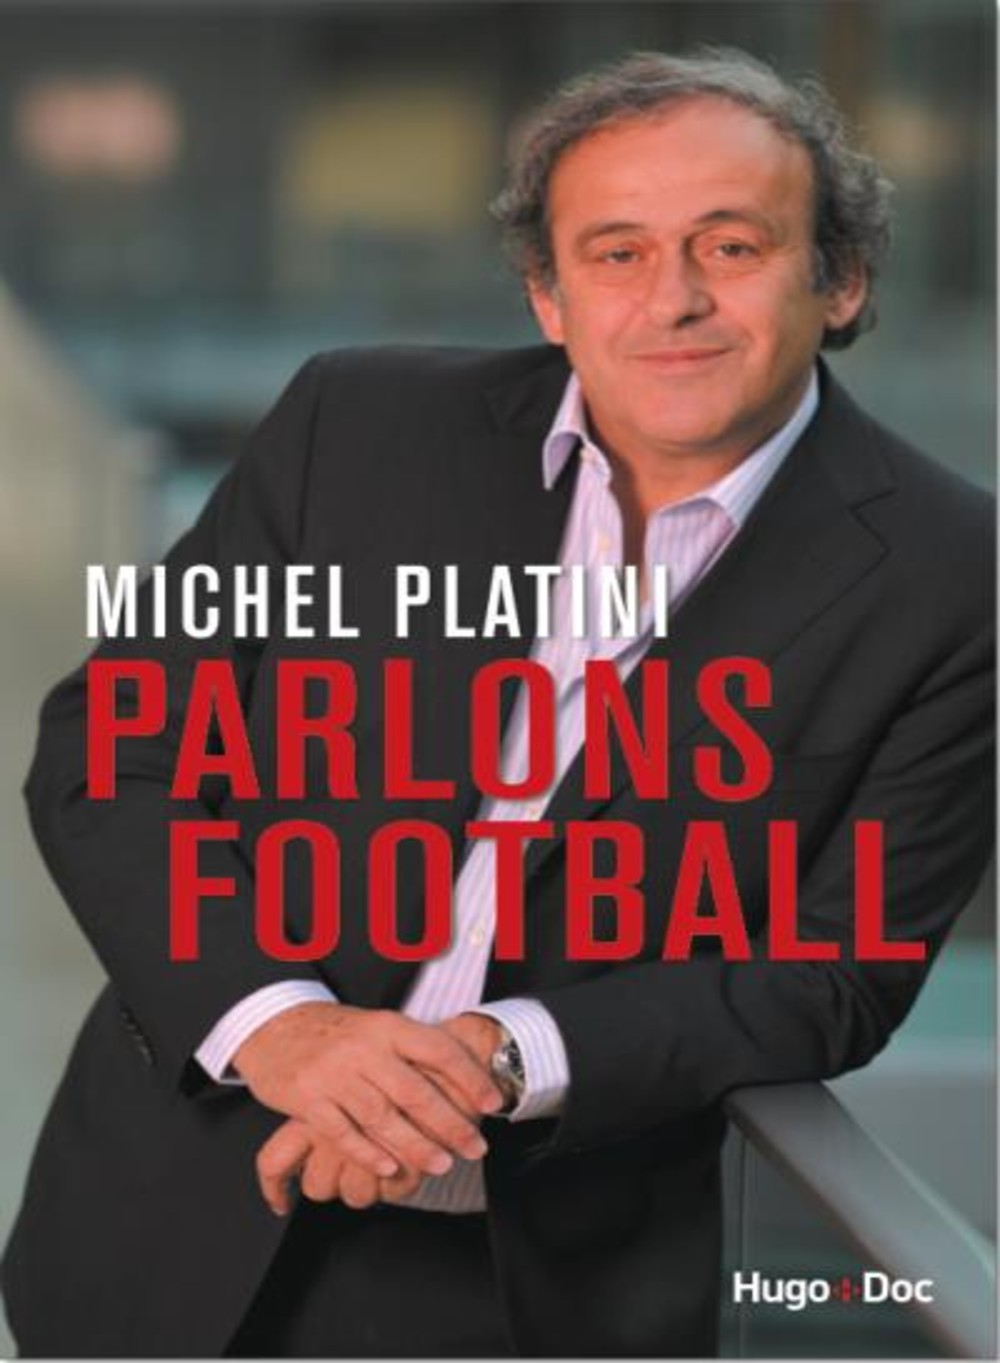 Michel Platini's new book Parlons Football deals with his brilliant playing career and his controversial time as President of UEFA ©Amazon